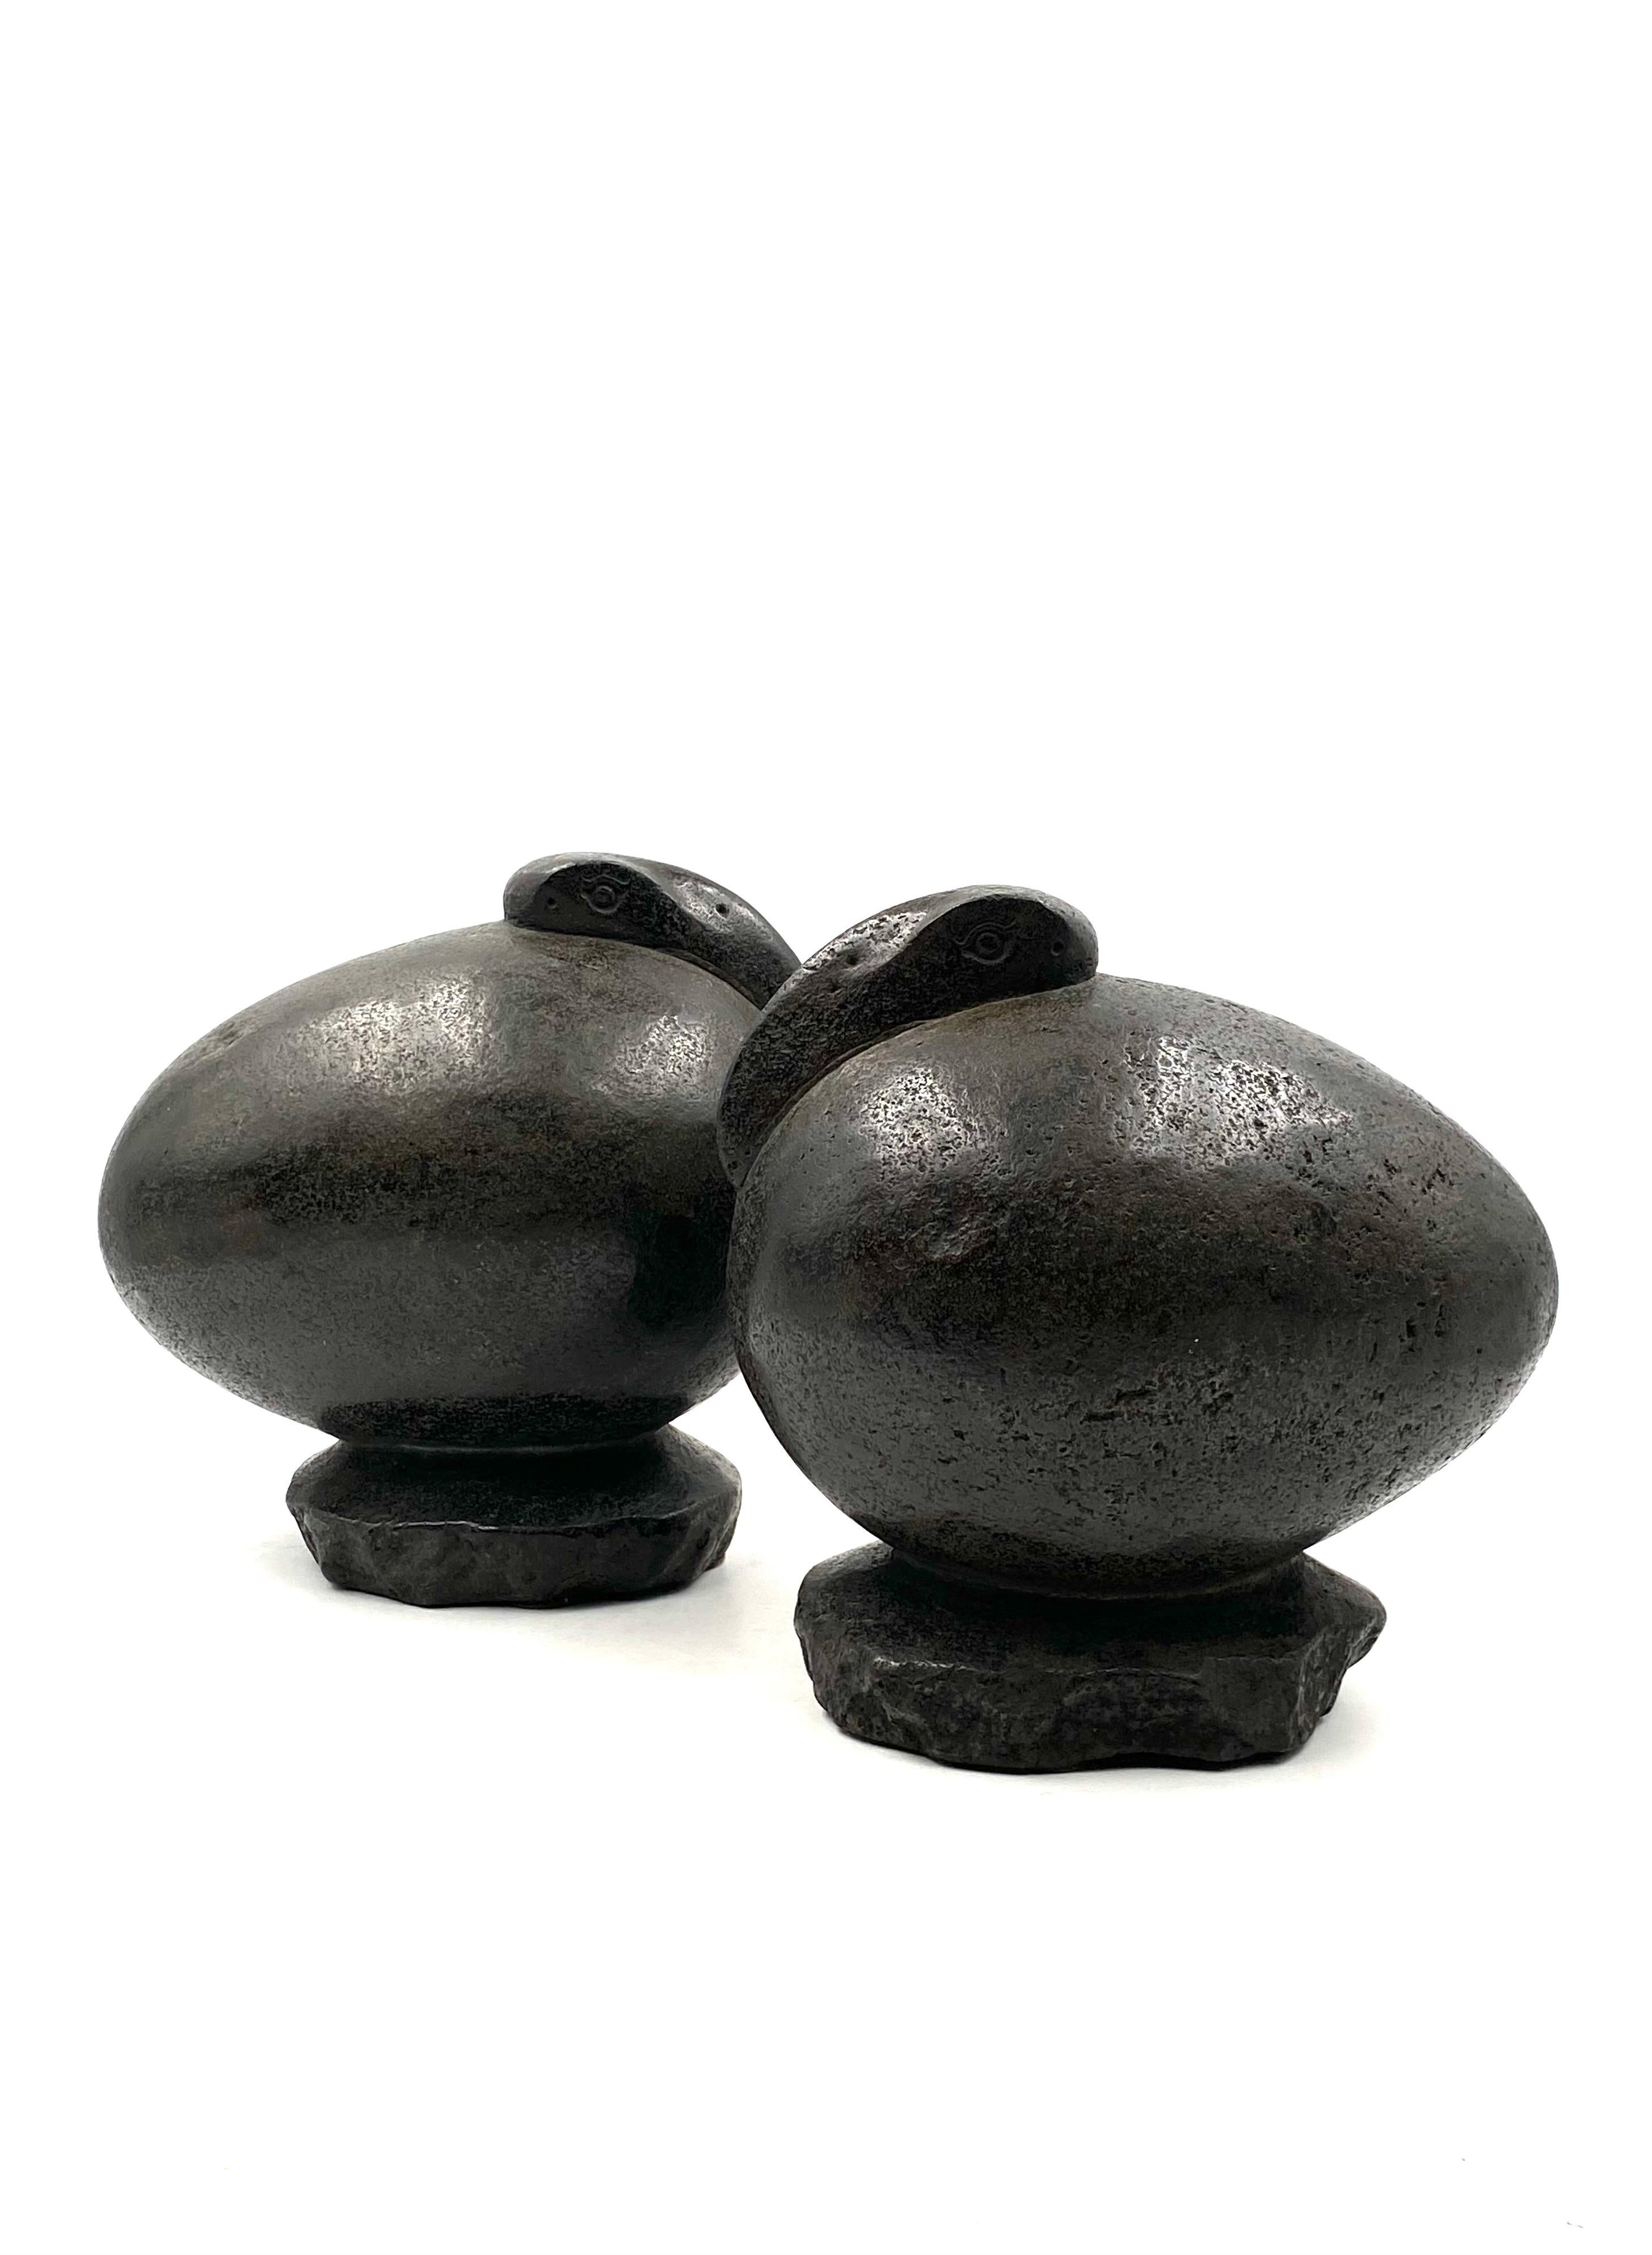 Ibis Birds, Pair of Basalt Ovoid Sculptures, France Early 20th Century 8